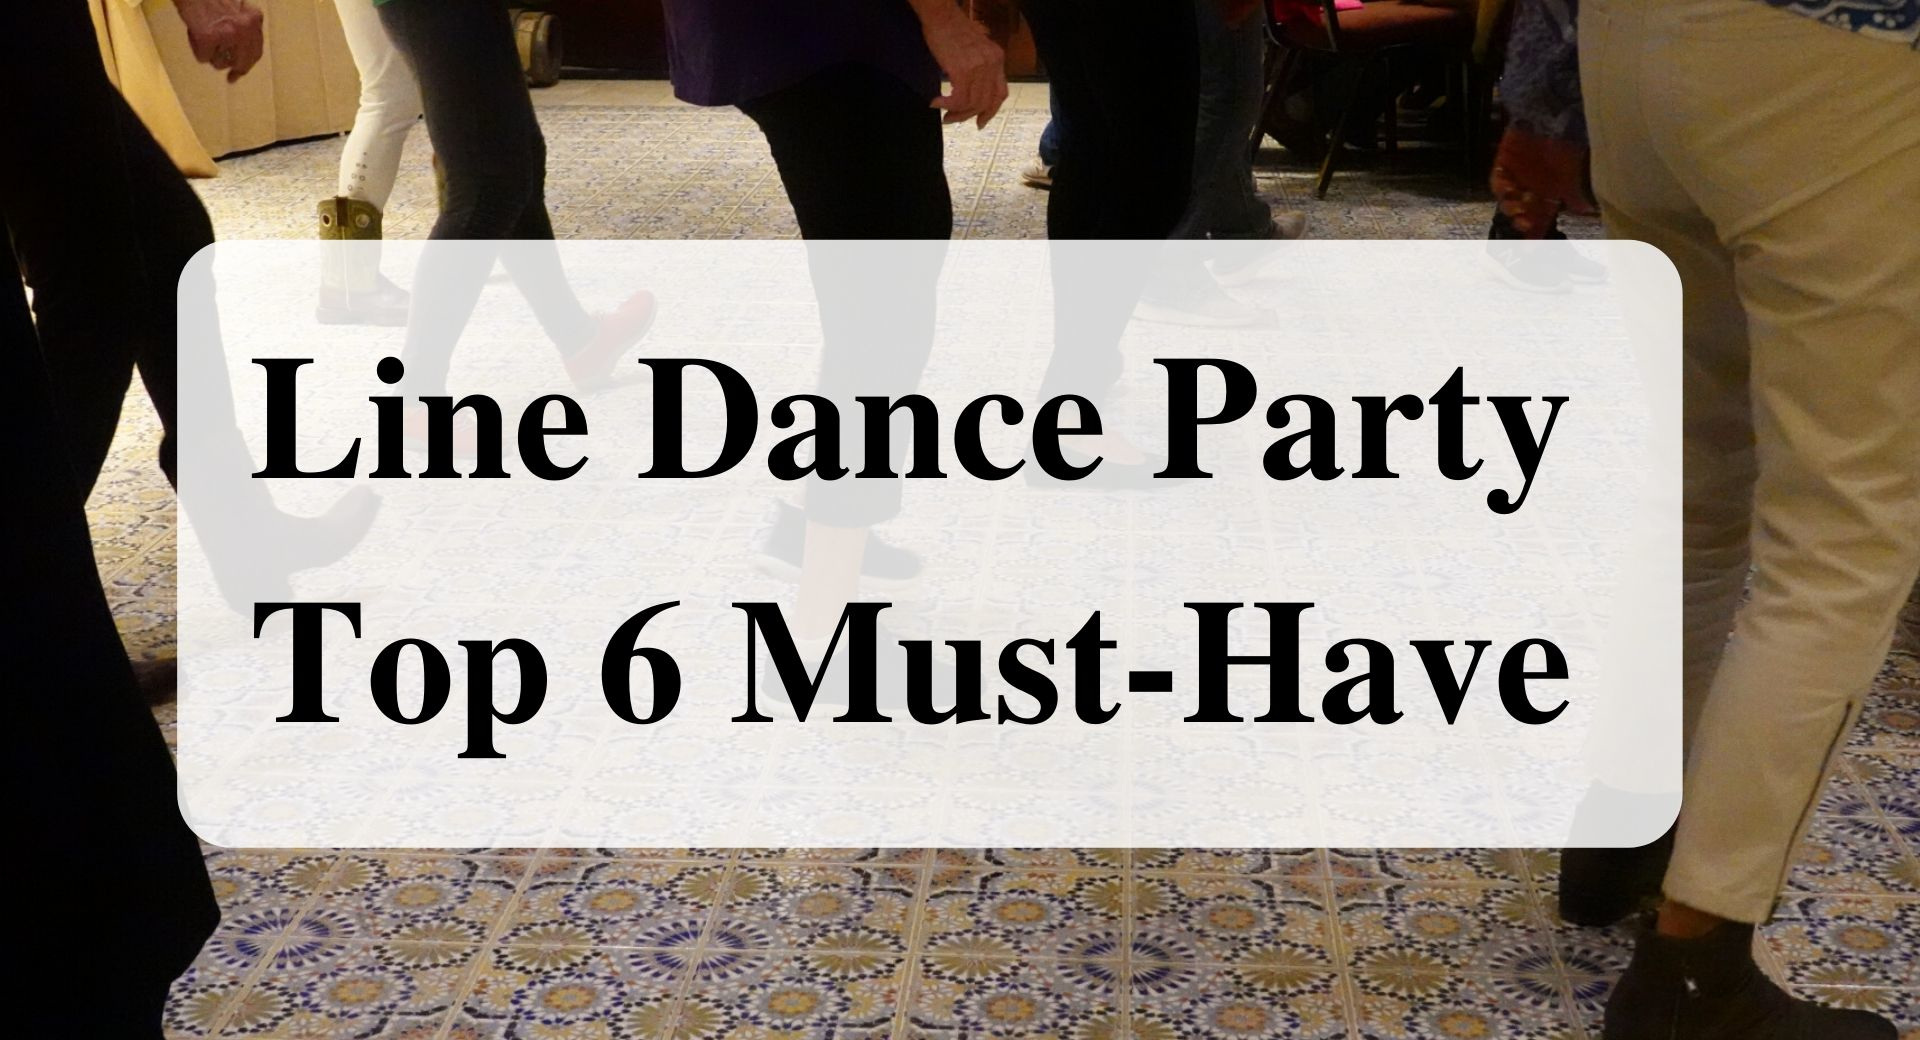 Line Dance Party Top 6 Must-Have main Forever sabbatical